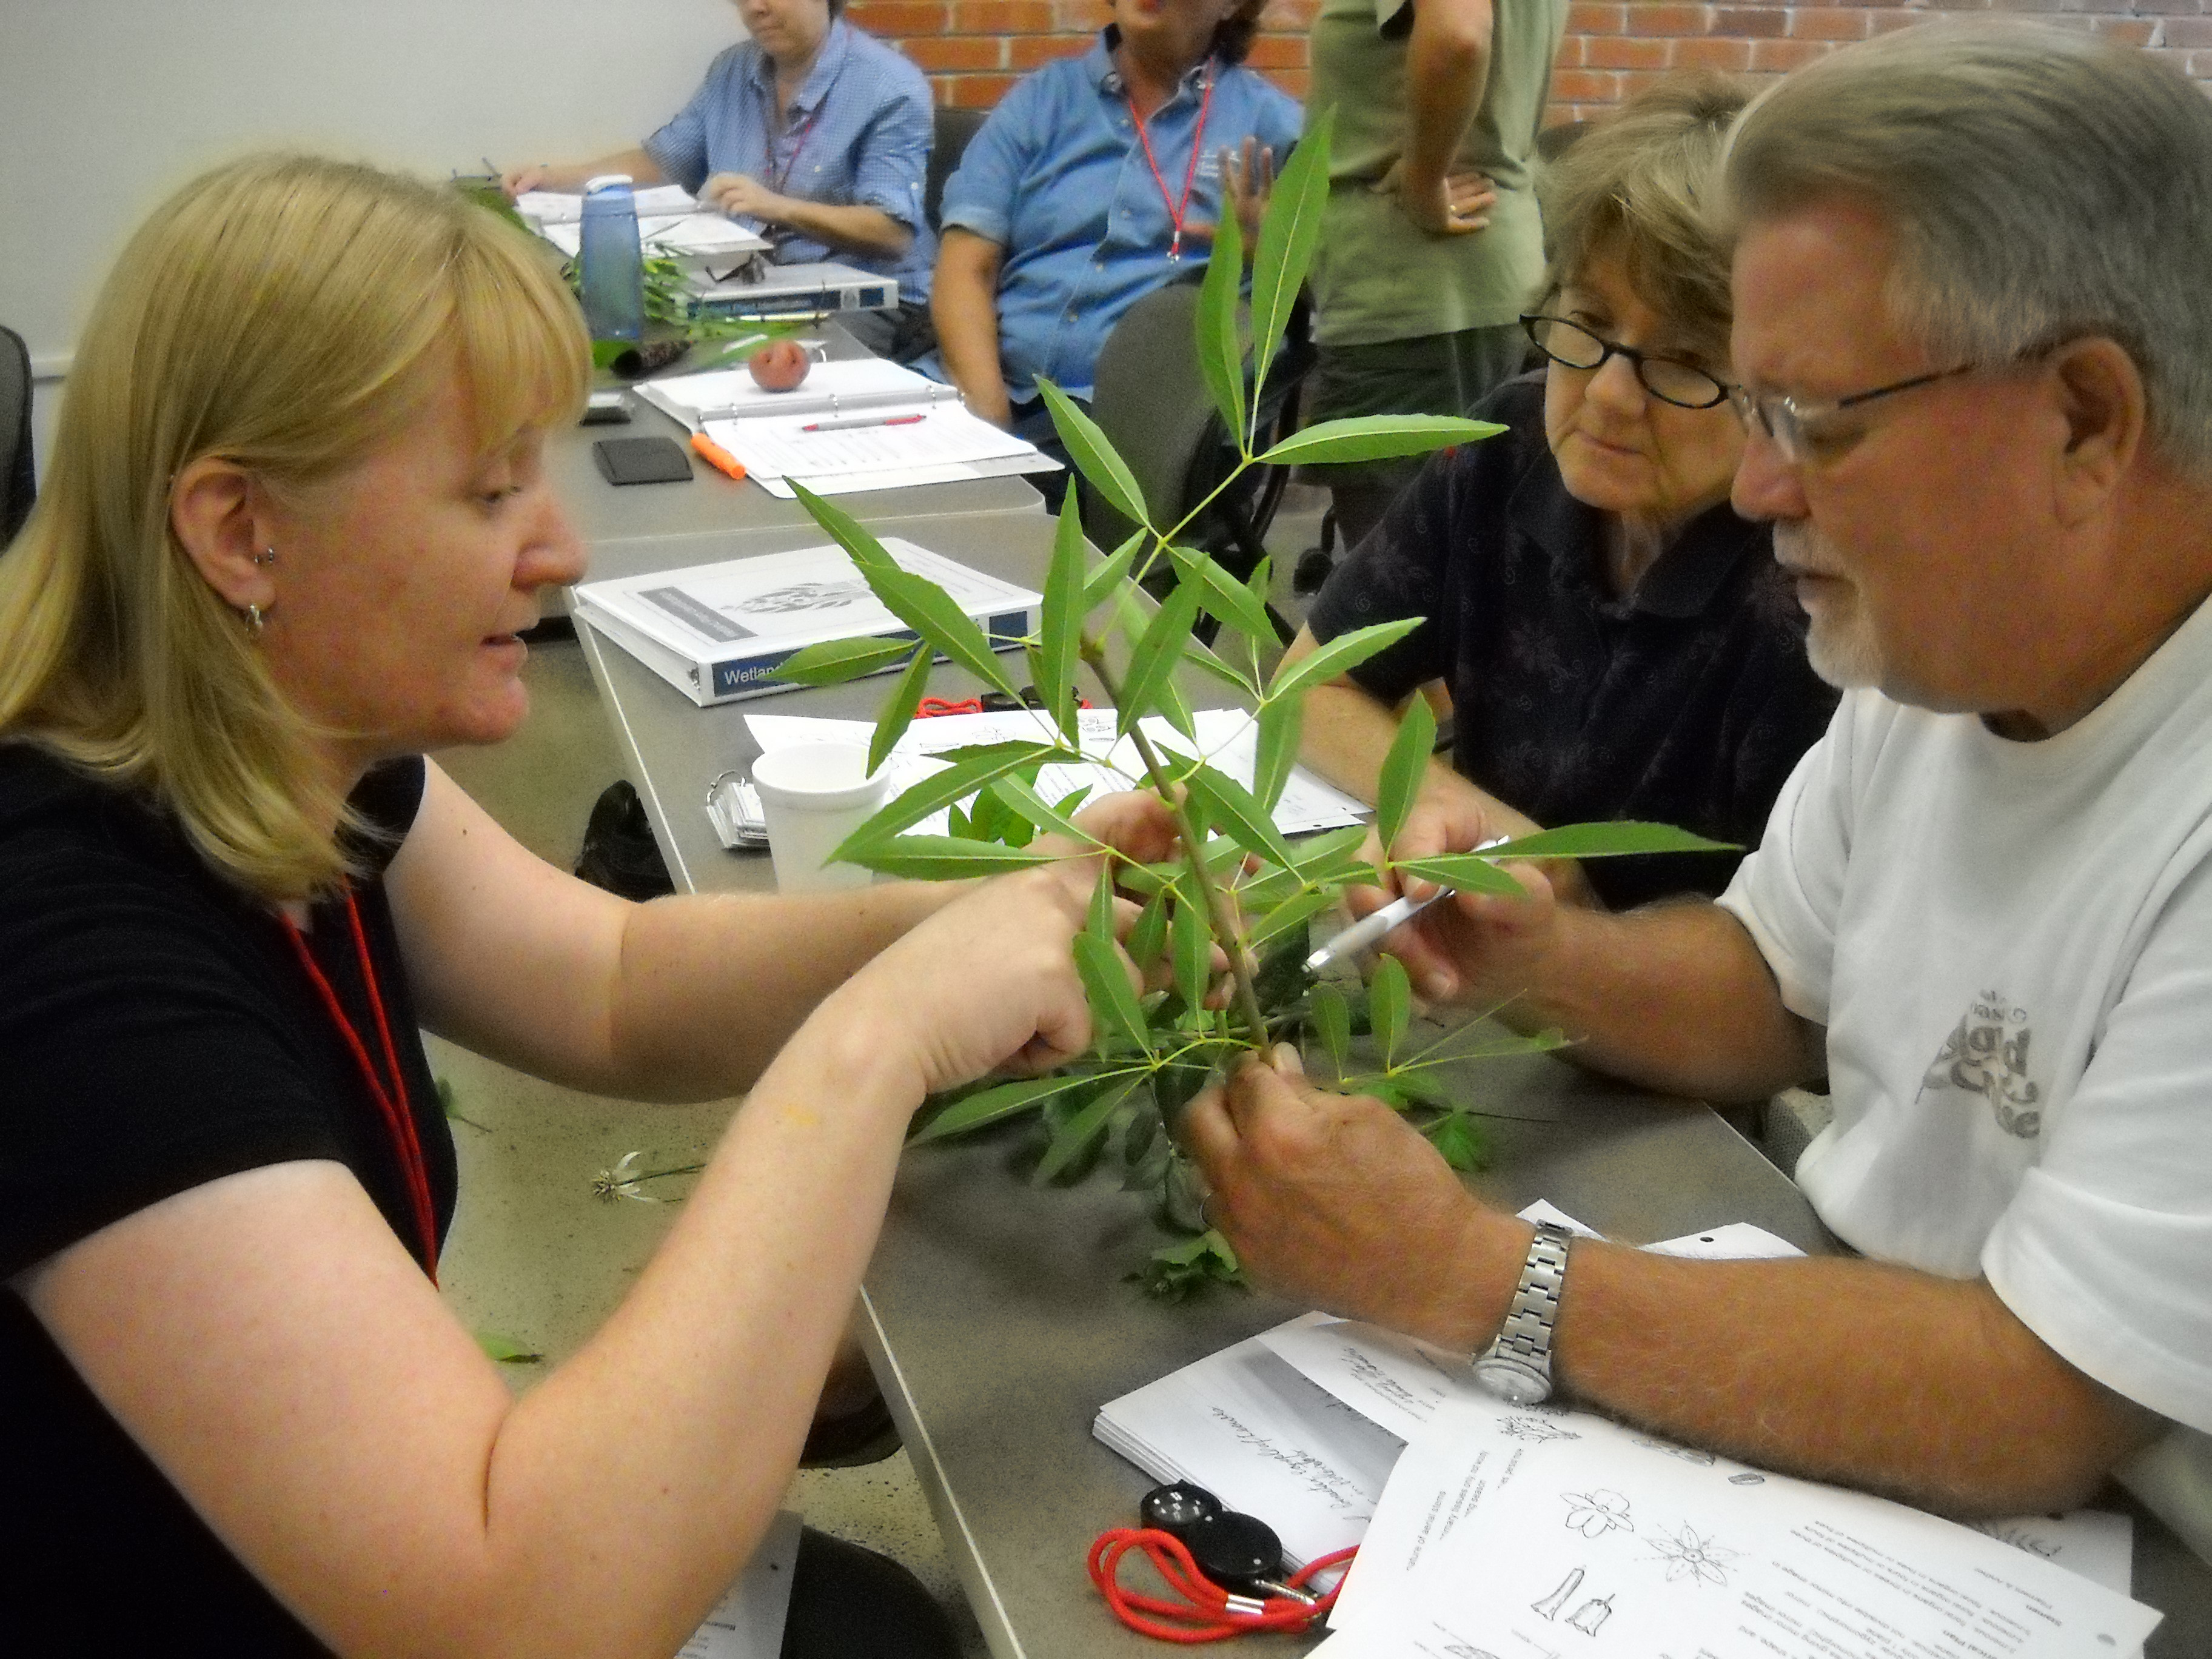 Charriss York teachs the Wetland Restoration Team plant botany at the Plant ID course